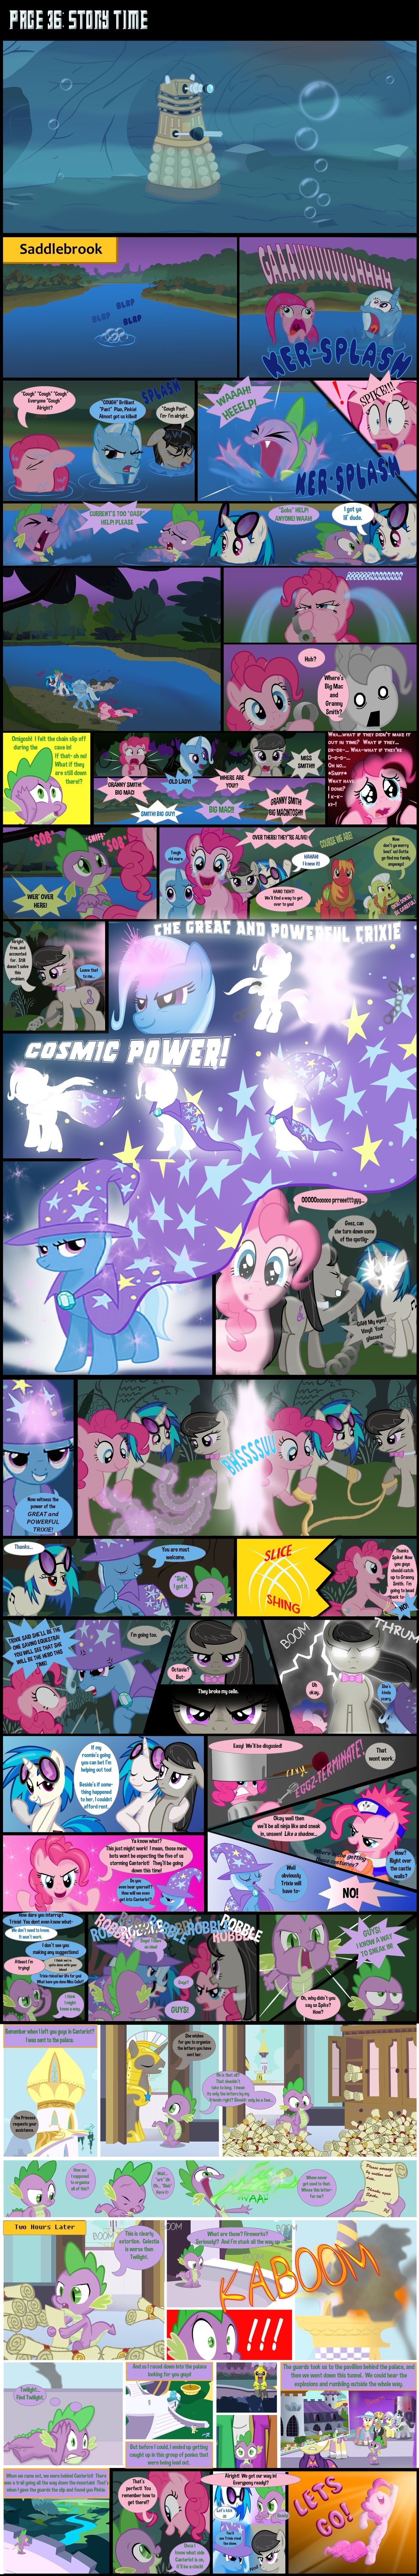 [ShwiggityShwah] Doctor Whooves: Elder (My Little Pony: Friendship is Magic) [English] [Ongoing] 35